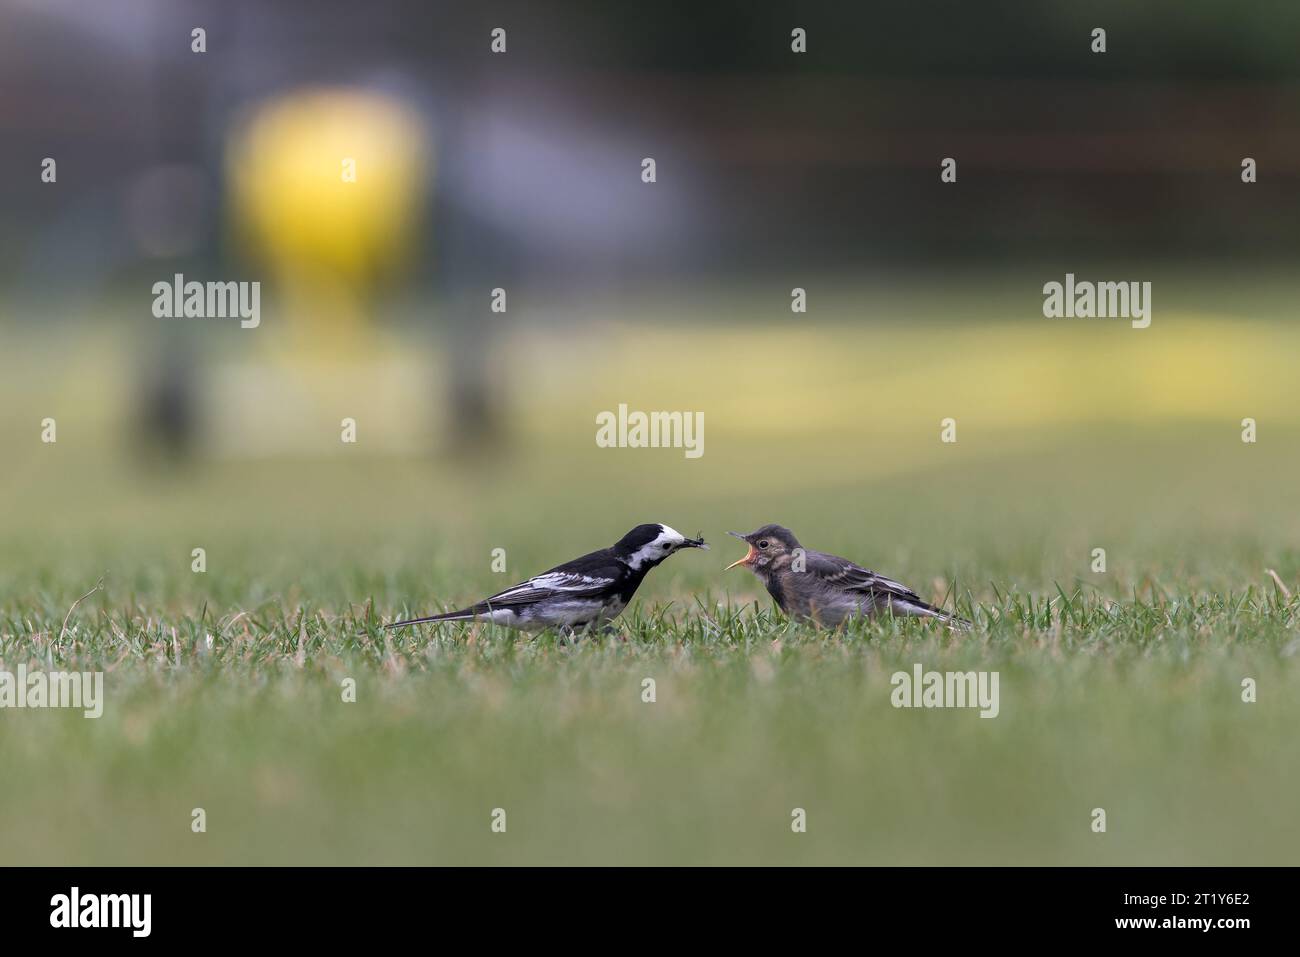 Pied Wagtail [ Motacilla alba ] on lawn with insect in its beak / bill feeding juvenile bird Stock Photo